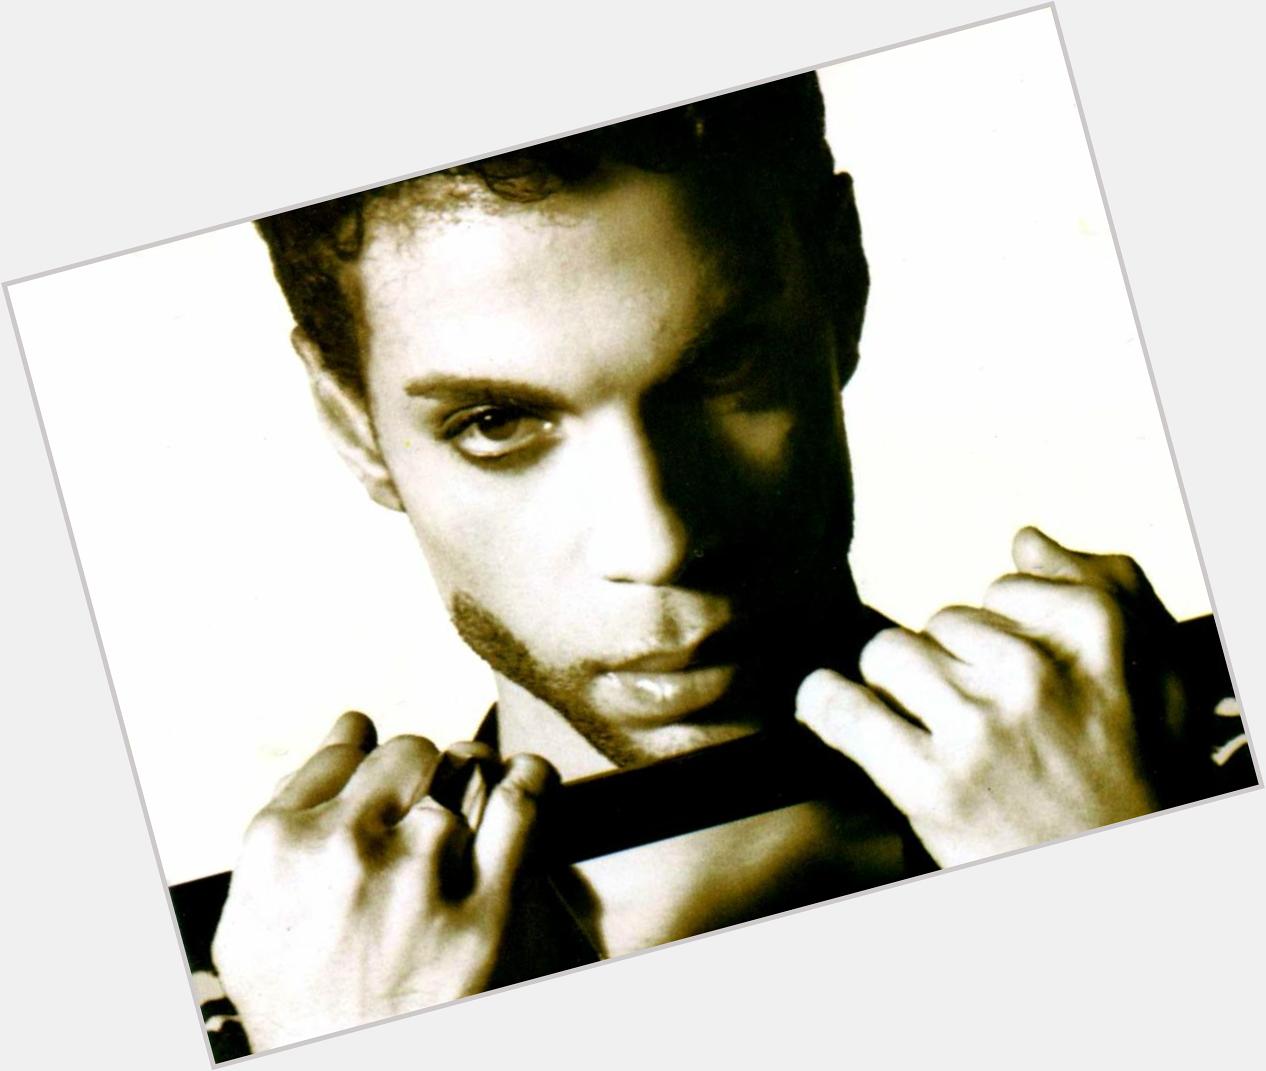 Happy Happy Birthday to this MUSICAL GENIUS PRINCE!!! YOU HAVE NO IDEA WHAT YOUR MUSIC MEANS TO ME!!! 